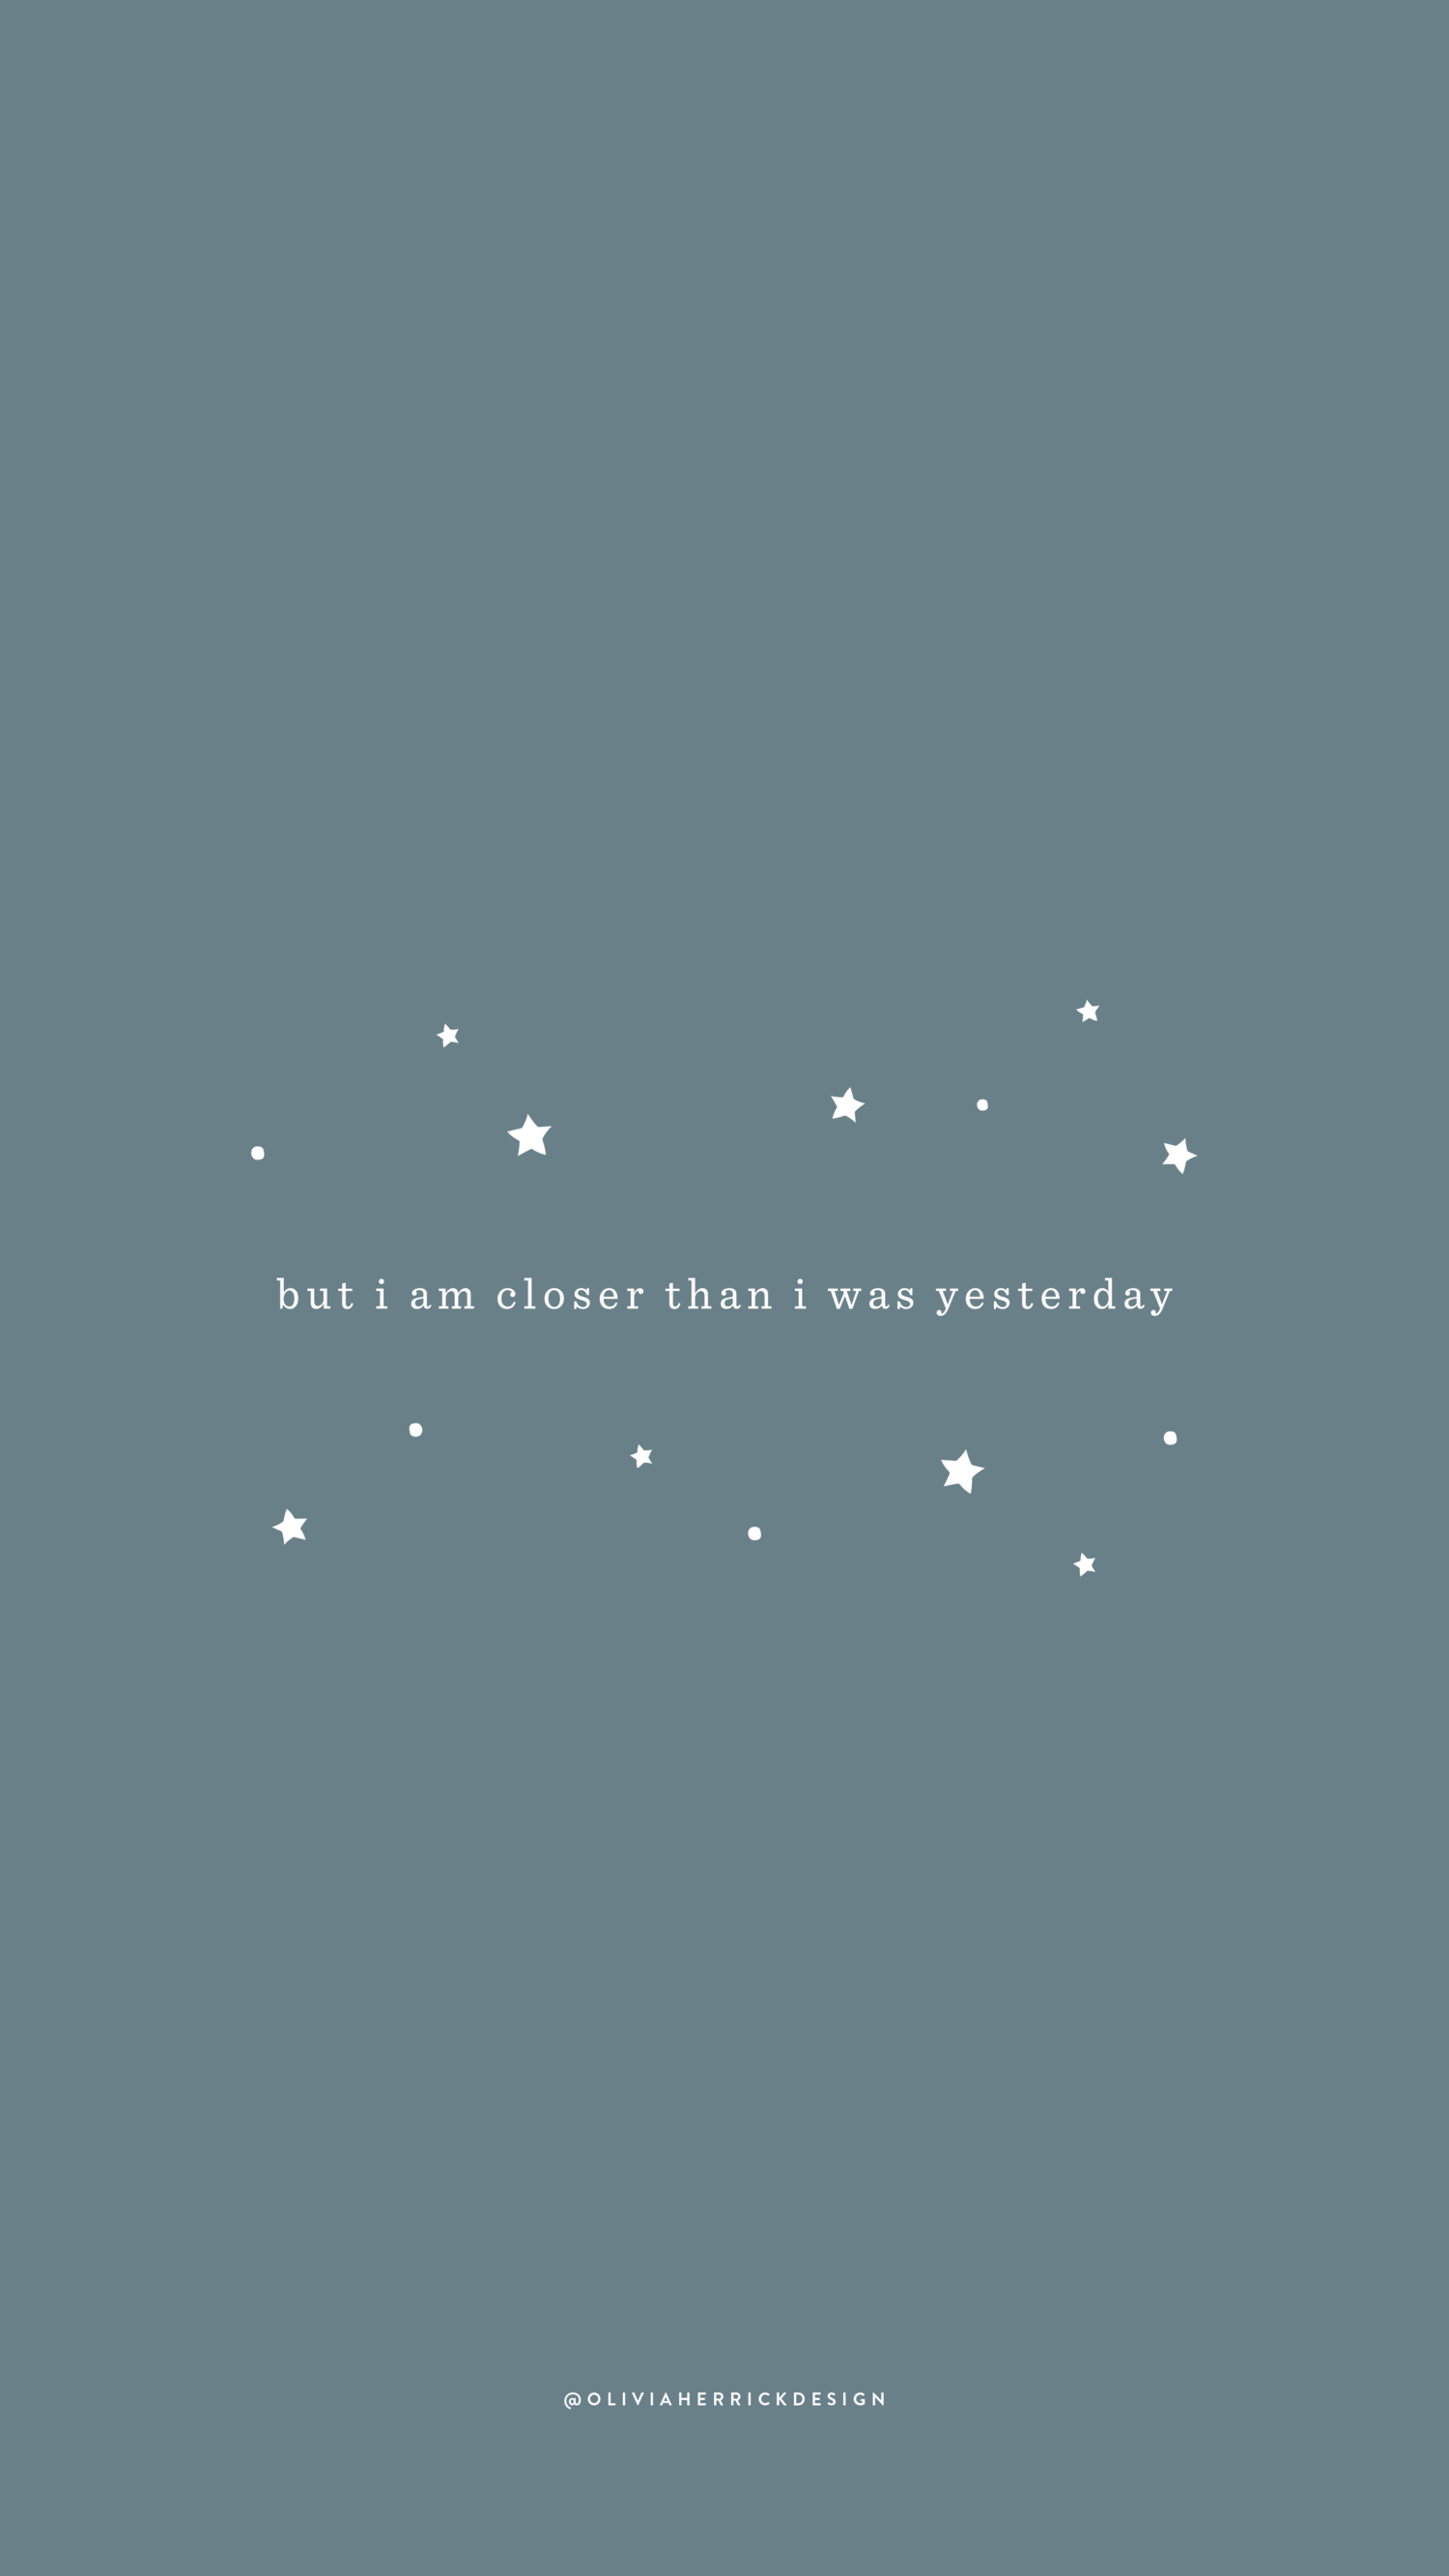 Free Phone Wallpaper: Closer Than I Was Yesterday